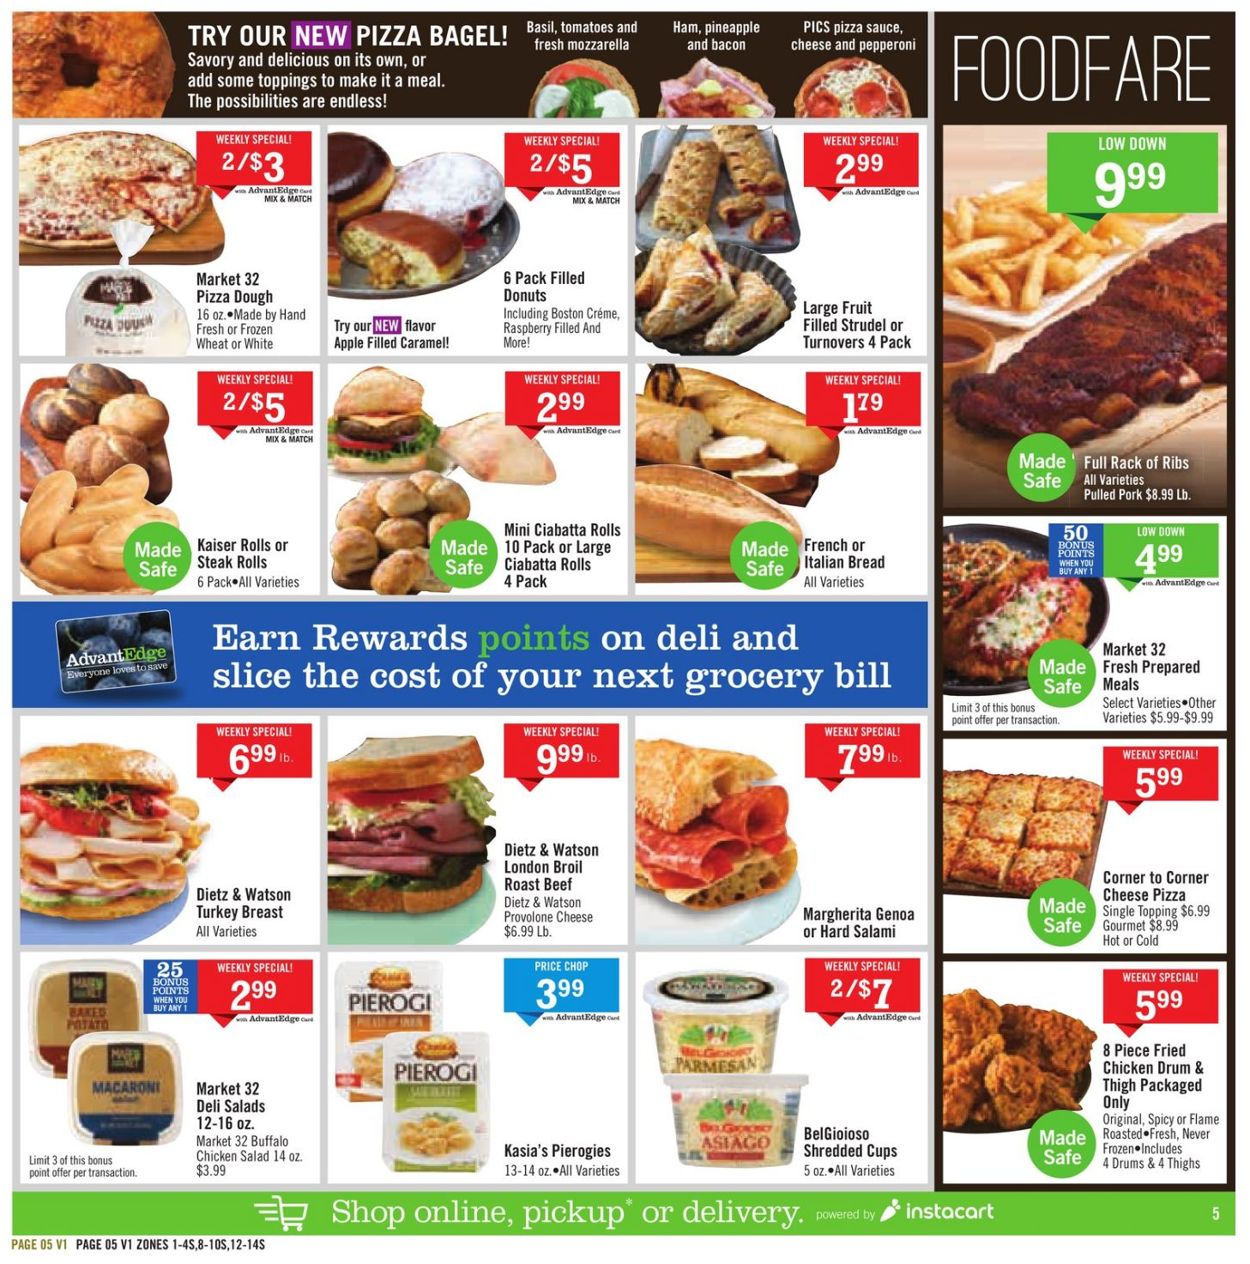 Price Chopper Cyber Monday 2020 Weekly Ad Circular - valid 11/29-12/05/2020 (Page 9)